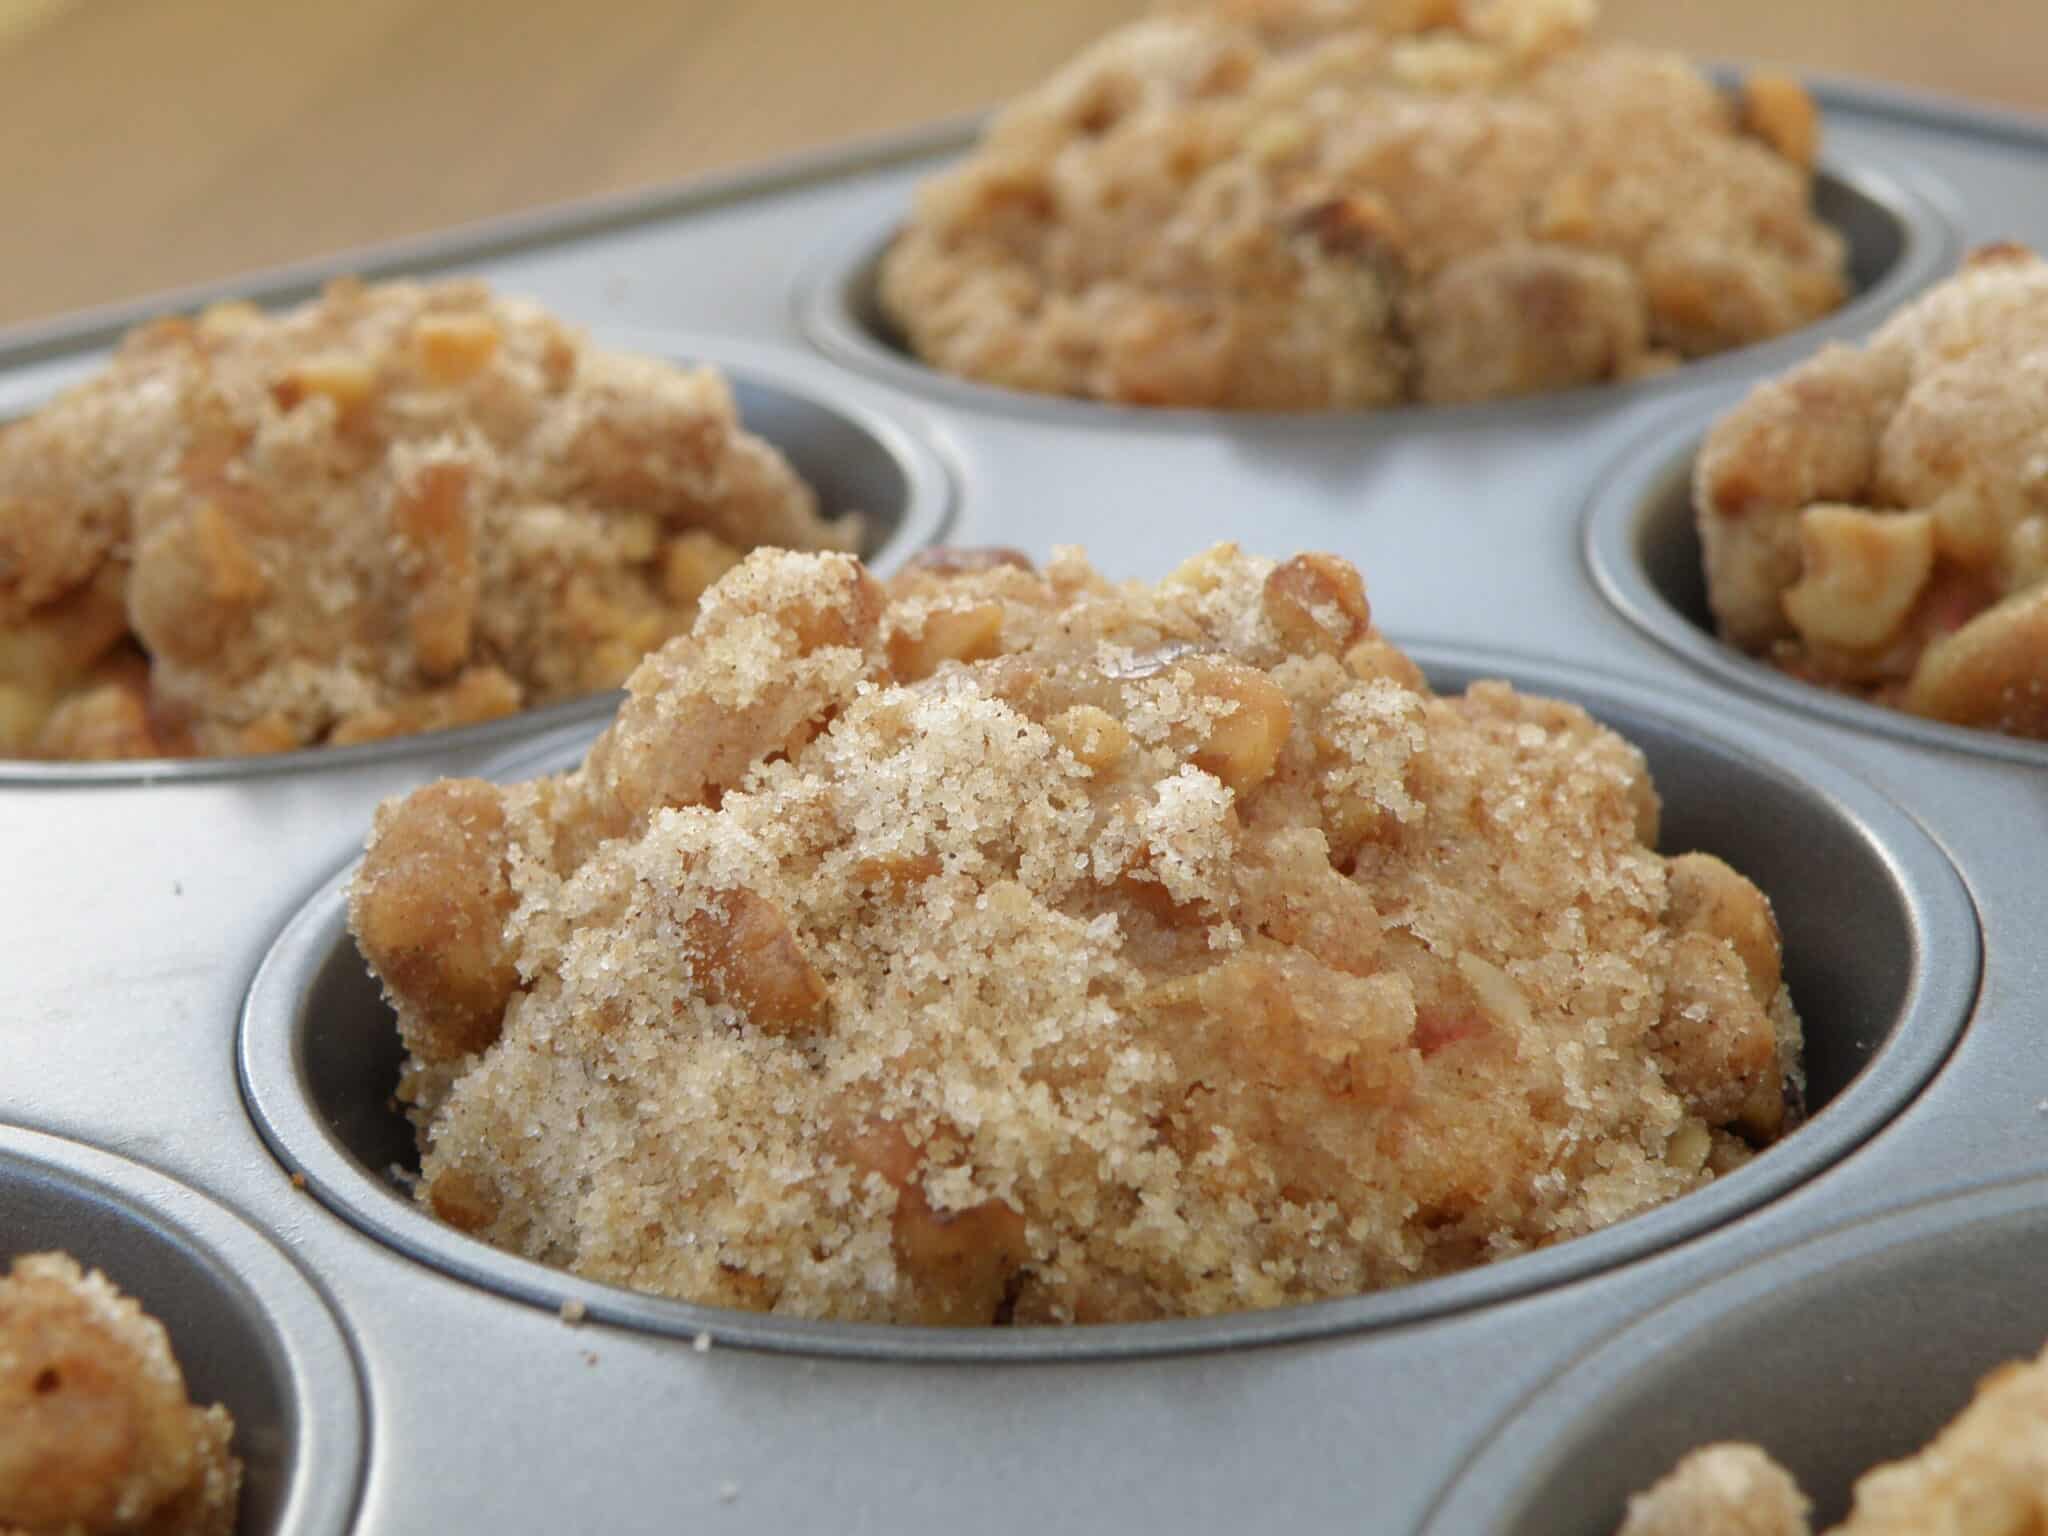 baked Muffins in a muffin pan